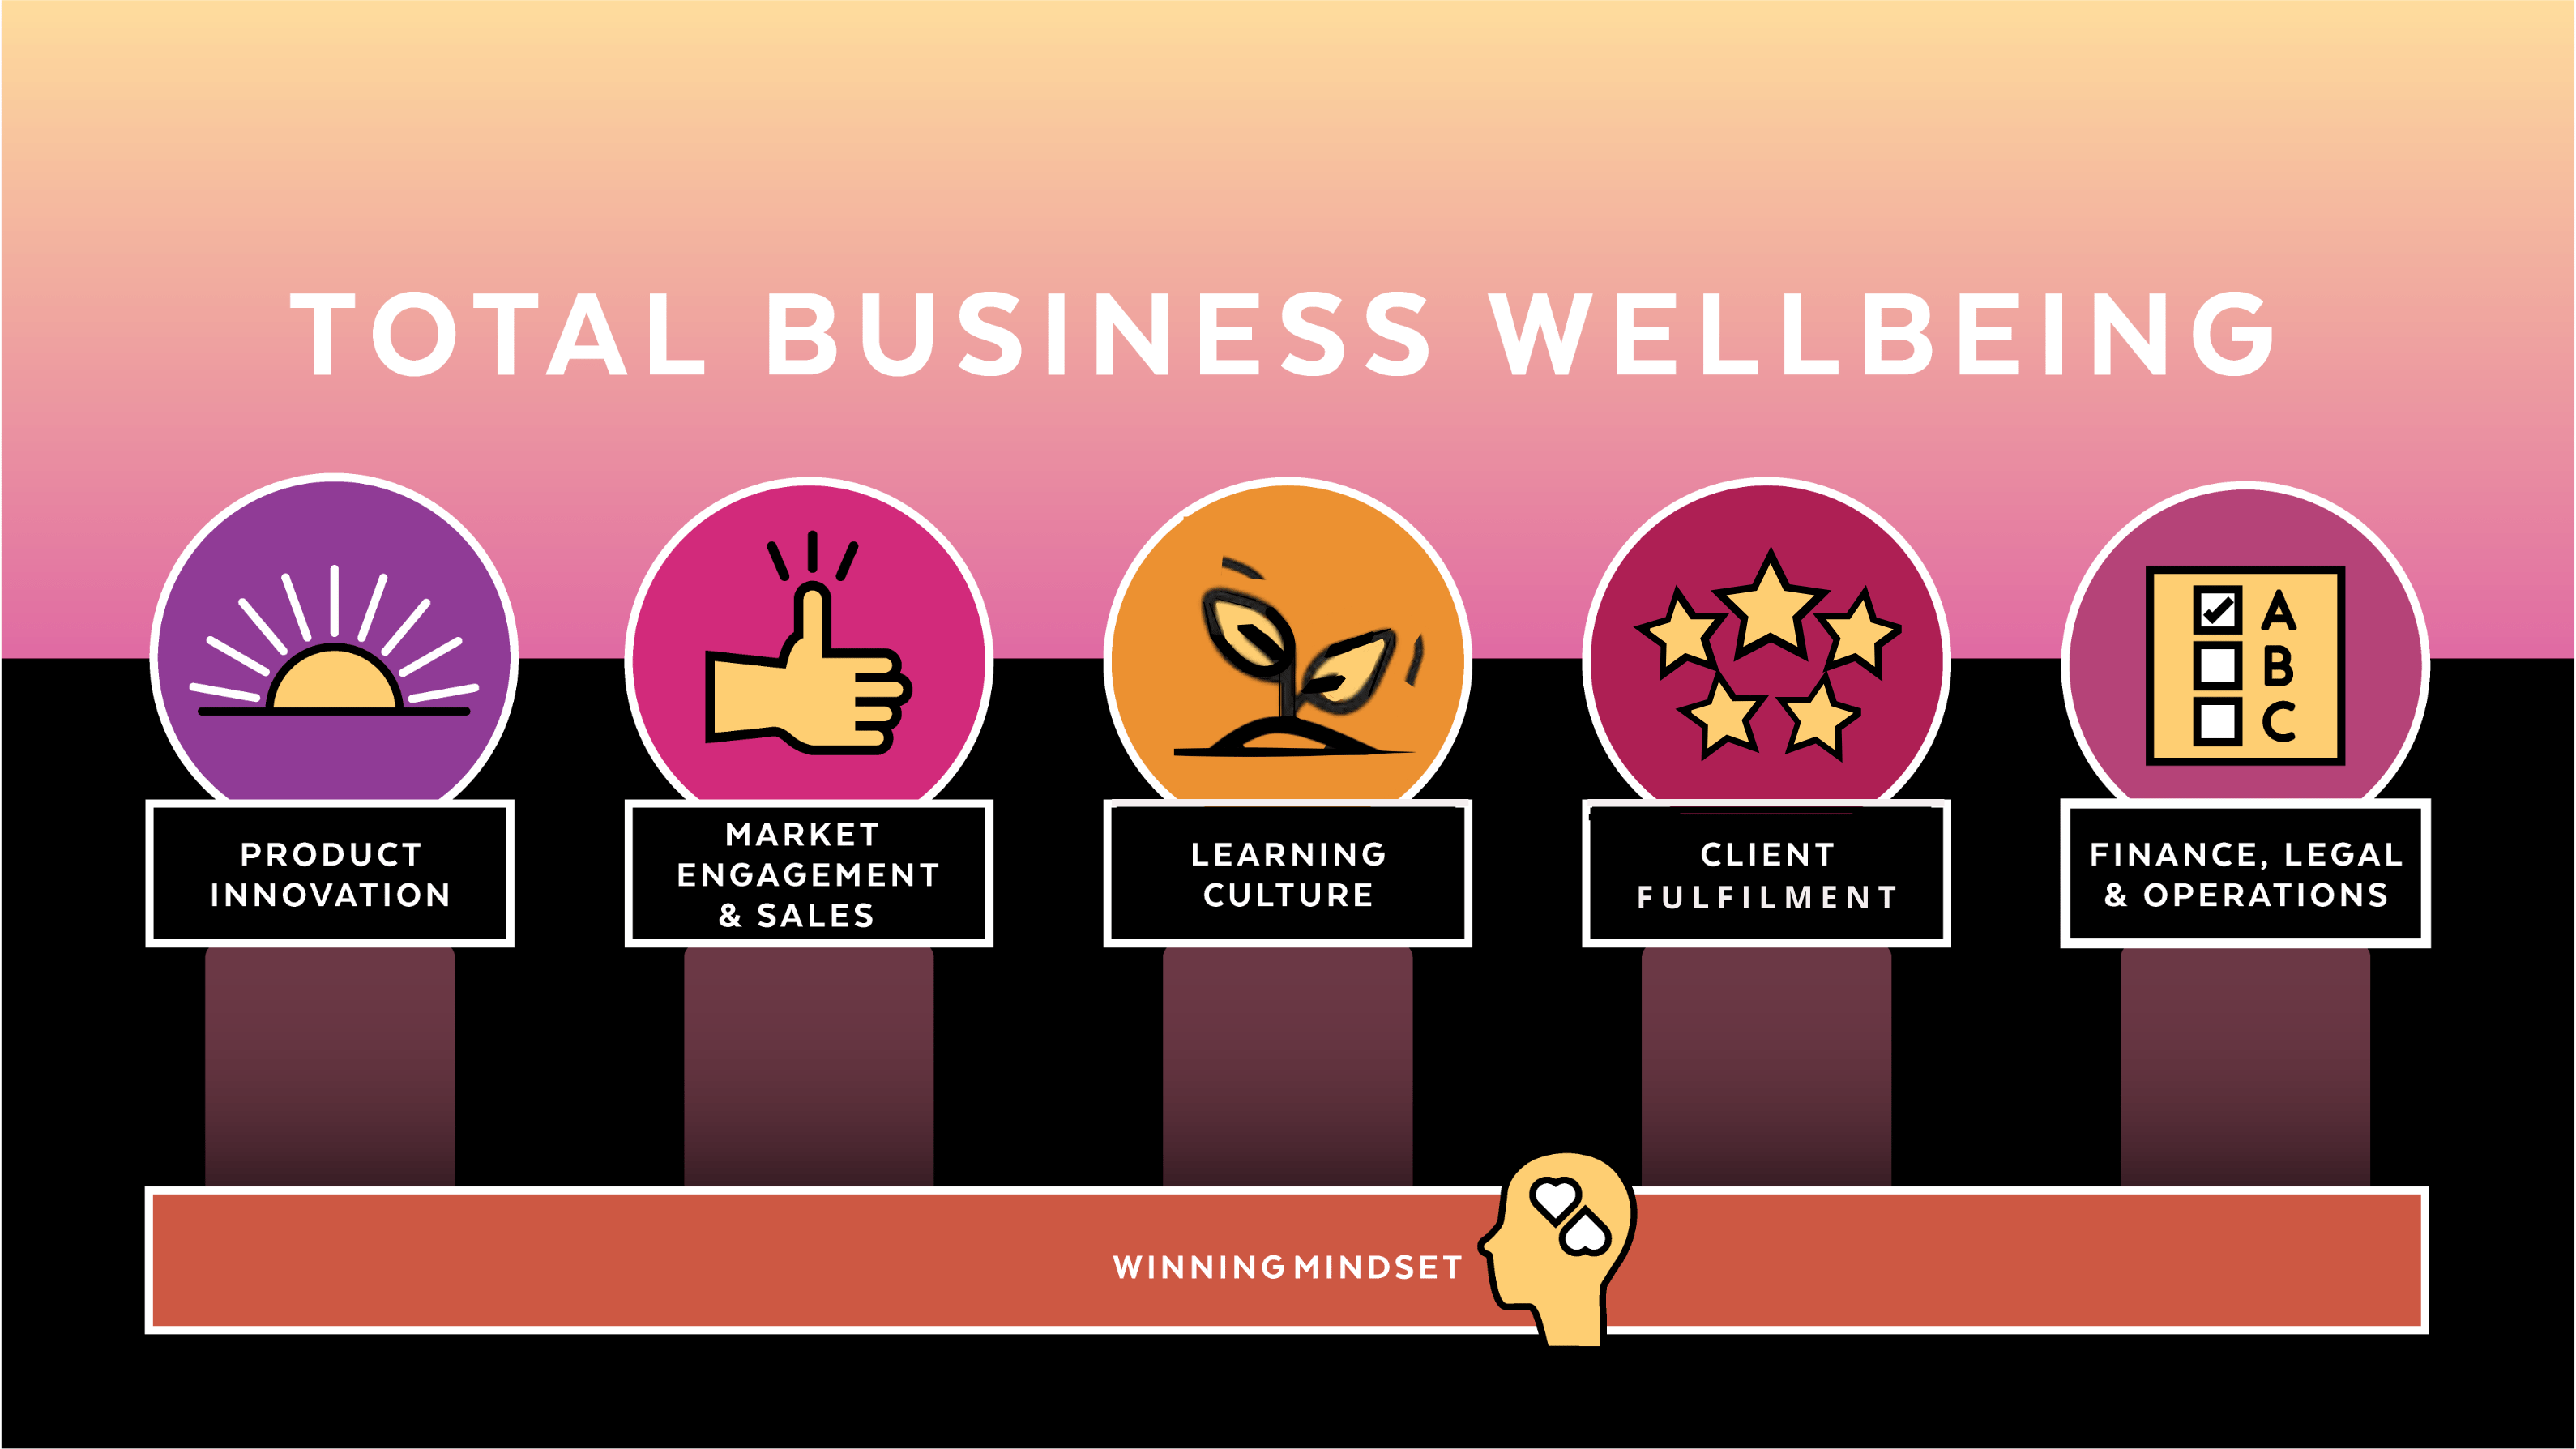 Total Business Wellbeing Model